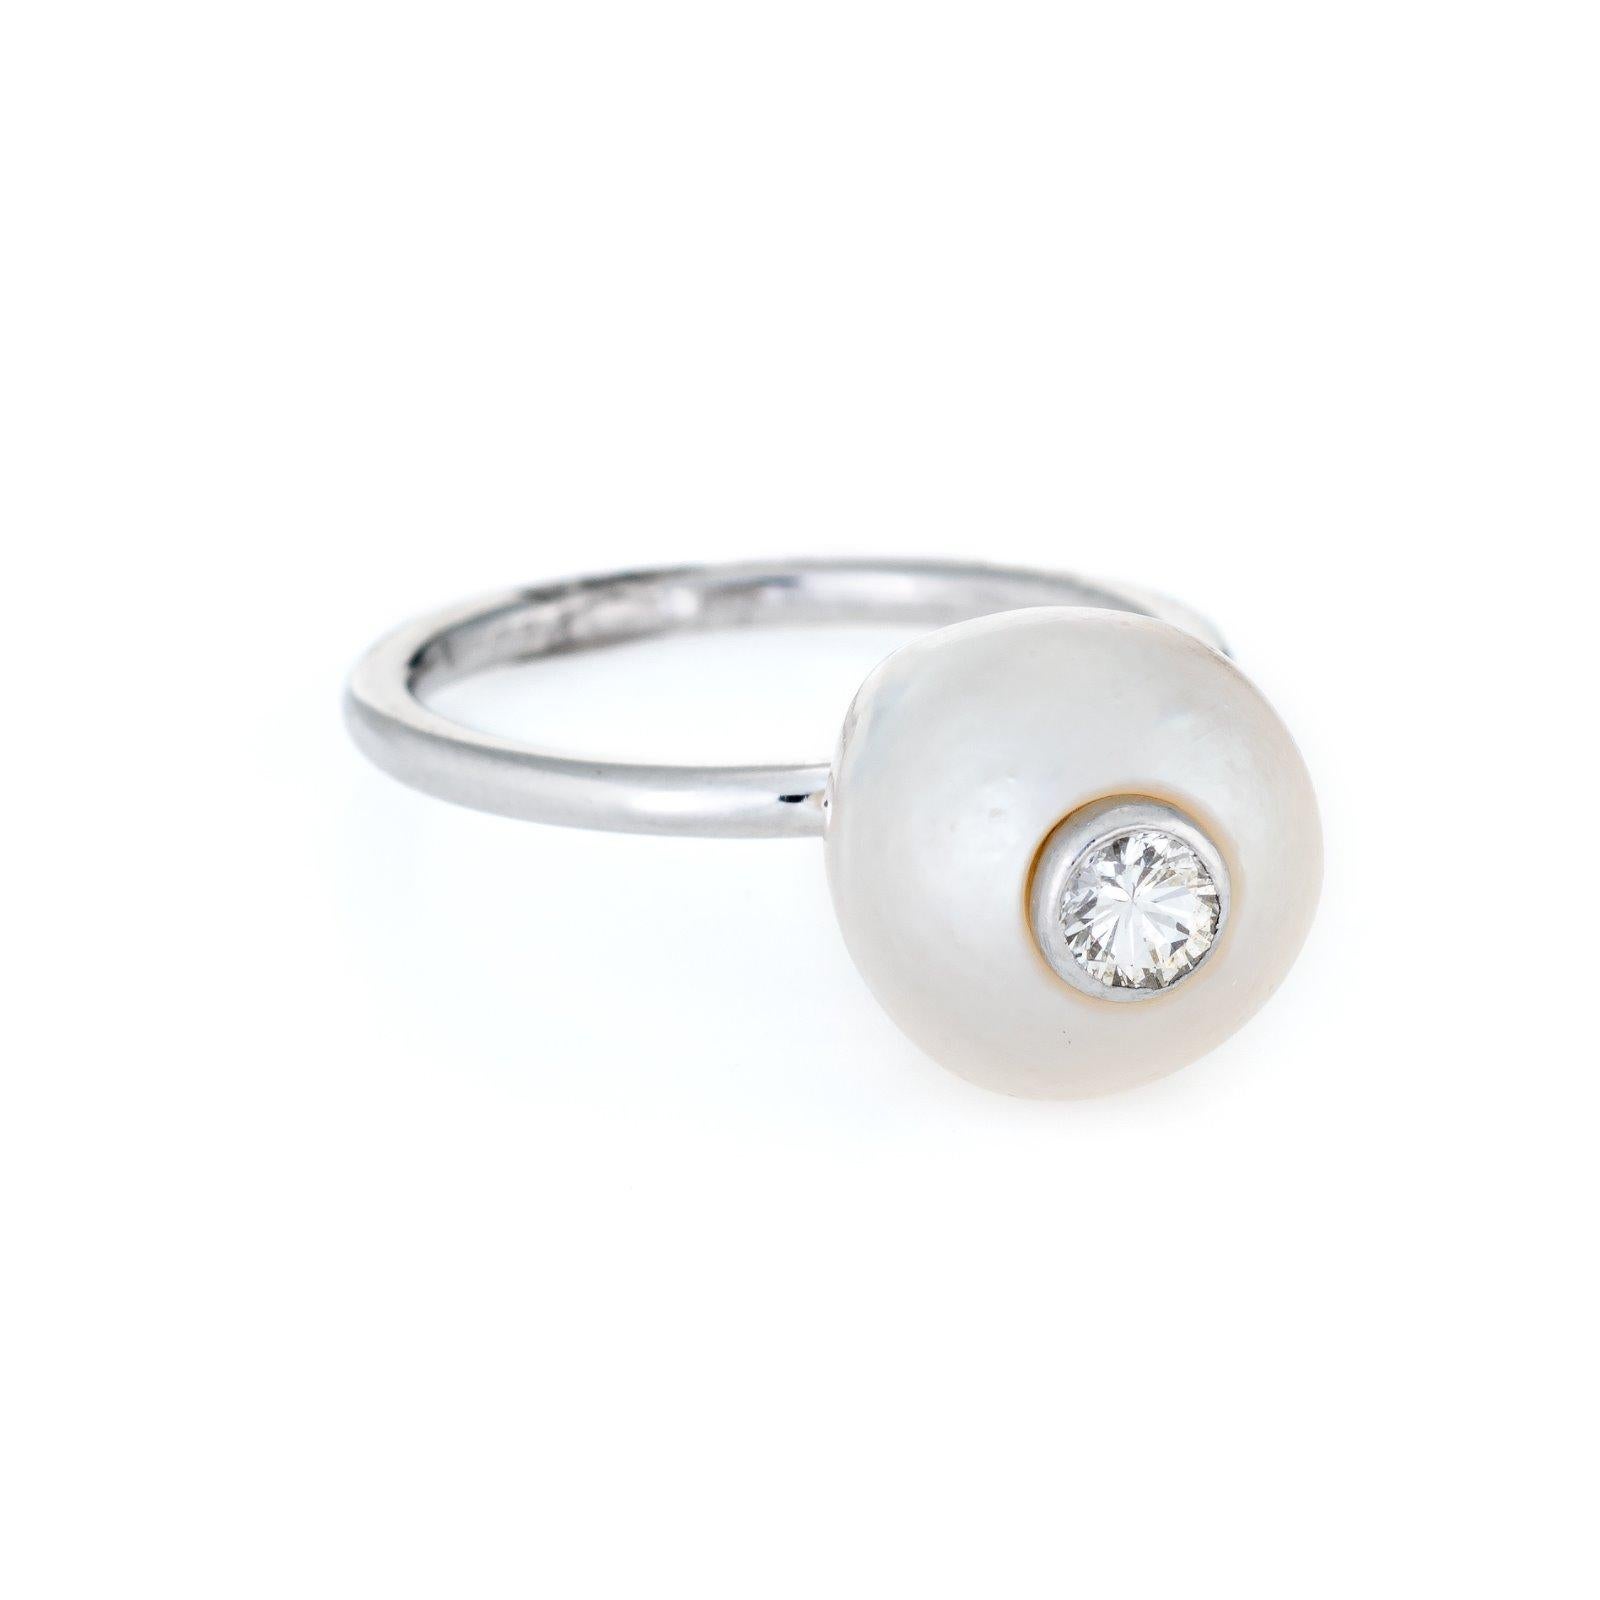 Finely detailed estate cultured pearl & diamond ring, crafted in 14 karat white gold. 

The cultured pearl measures 10mm with a diamond inset into the pearl (estimated at 0.05 carats - H-I color/VS2 clarity). The stones are in excellent condition